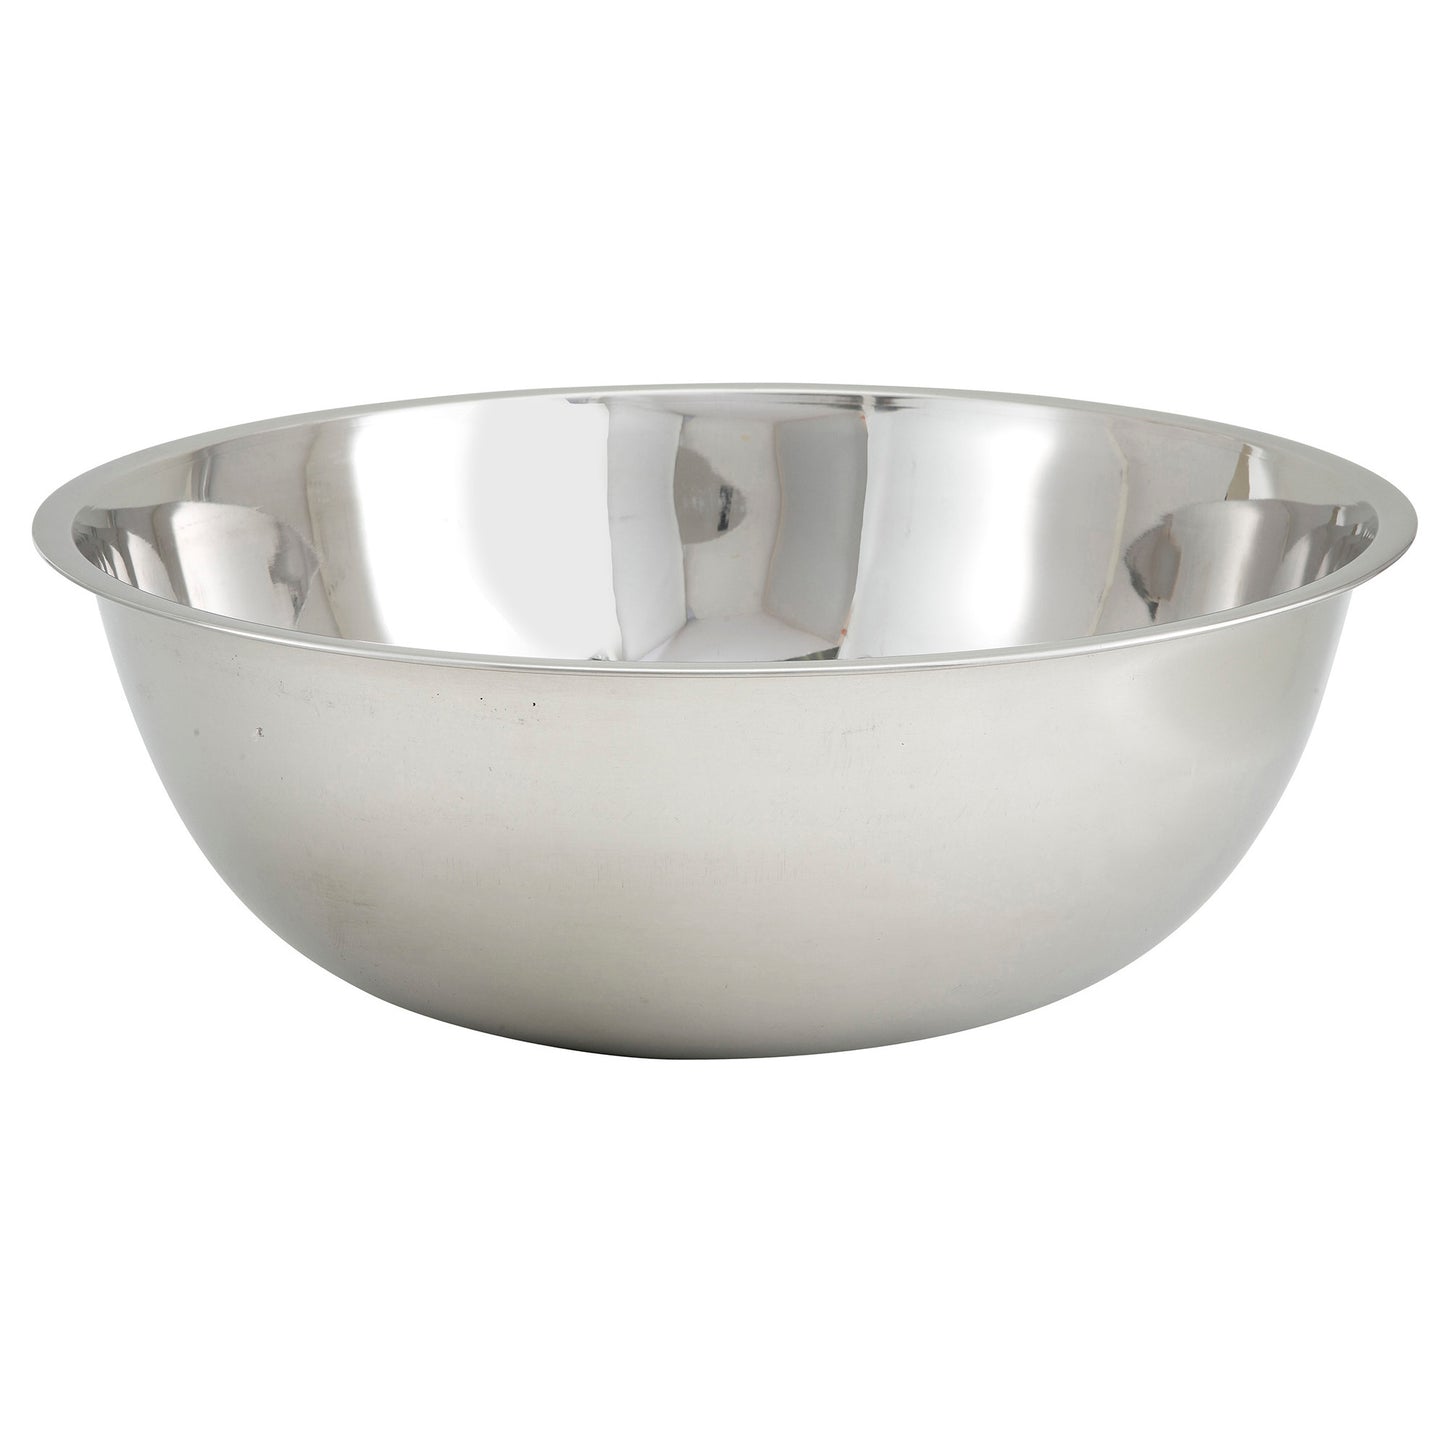 MXBT-2000Q - All-Purpose True Capacity Mixing Bowl, Stainless Steel - 20 Quart